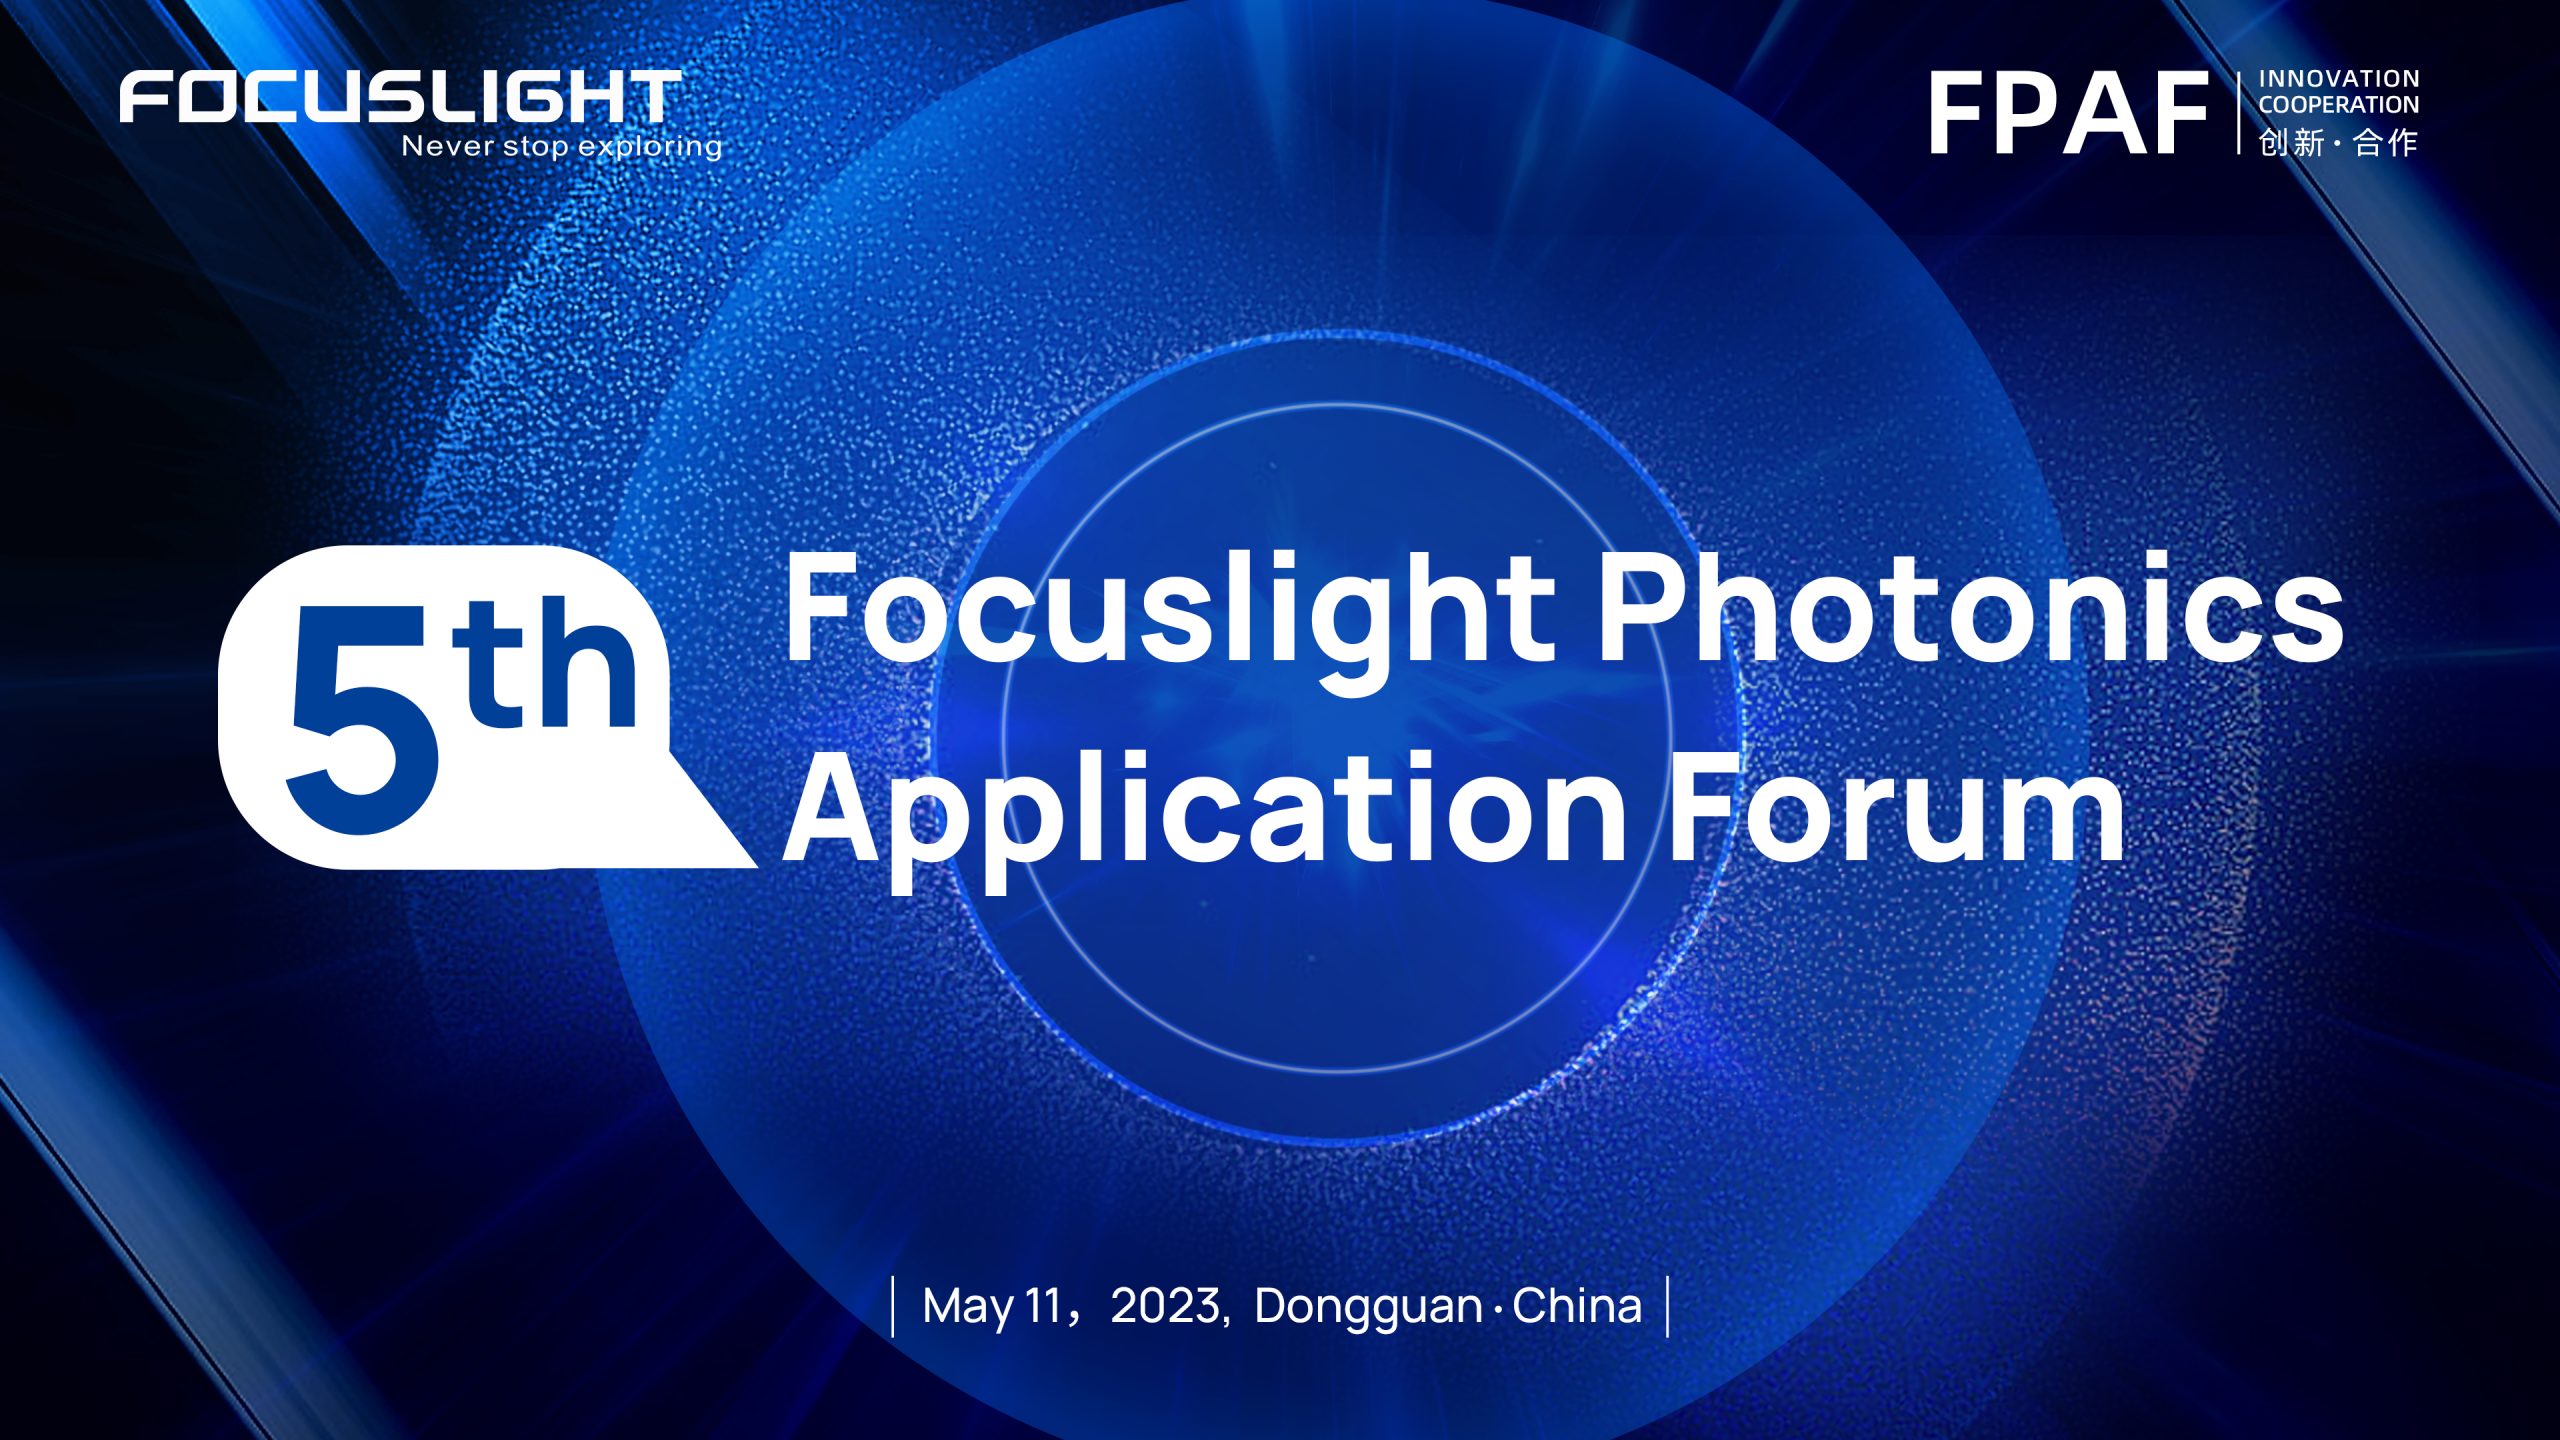 The 5th Forum | Focuslight Photonics Application Forum 2023 will be held on May 11, 2023